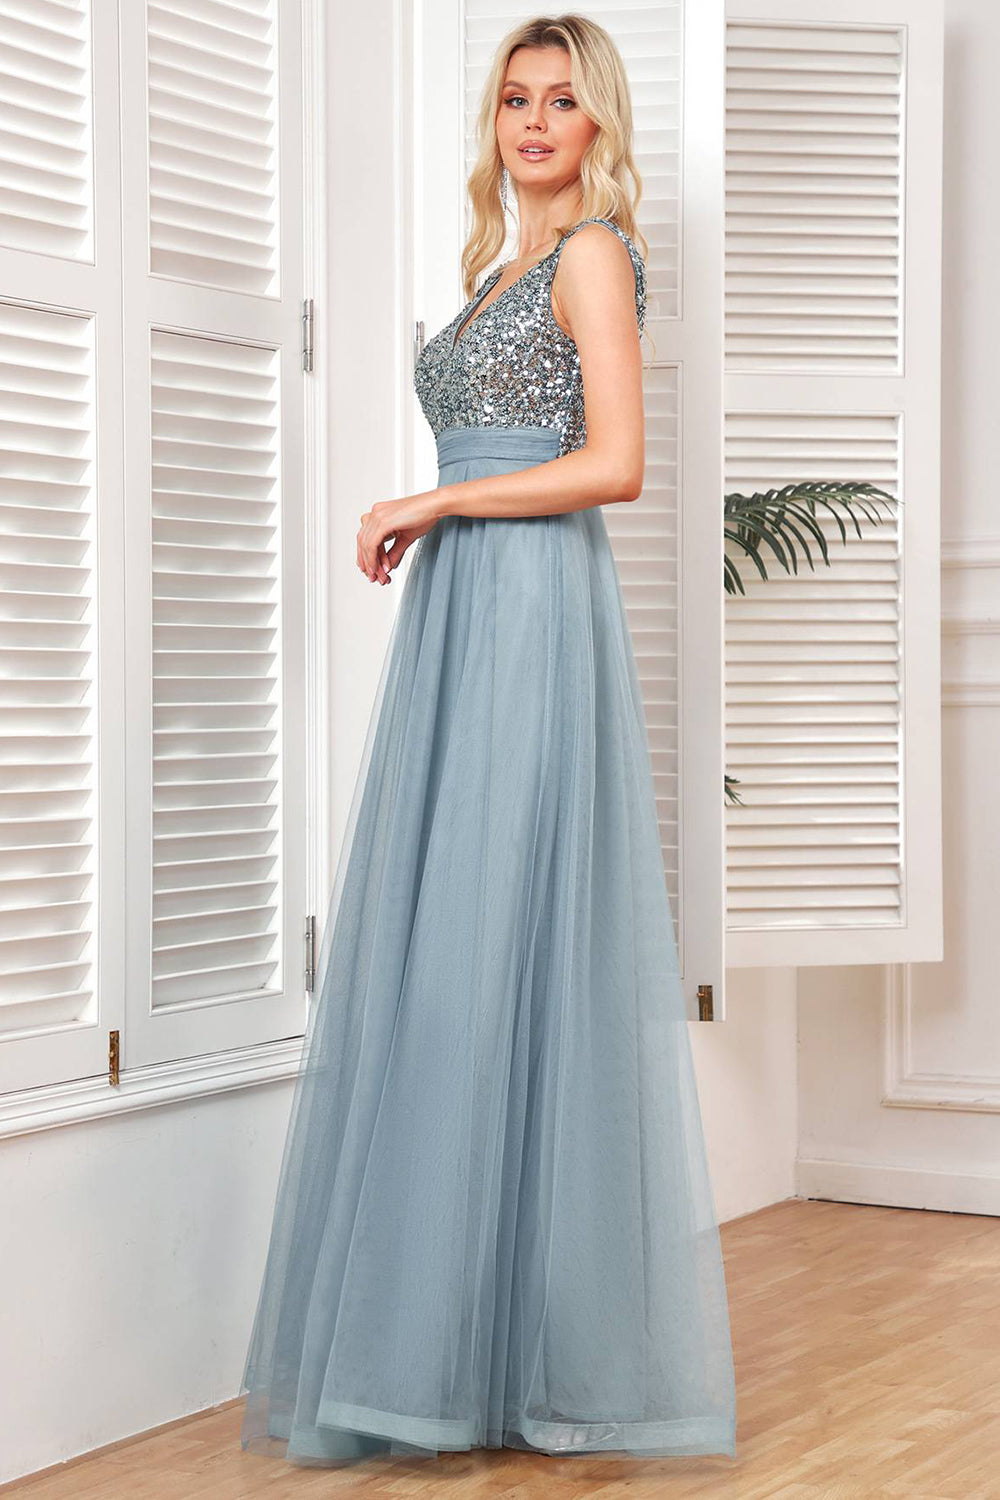 Grey Blue A Line Tulle Formal Dress with Sequins